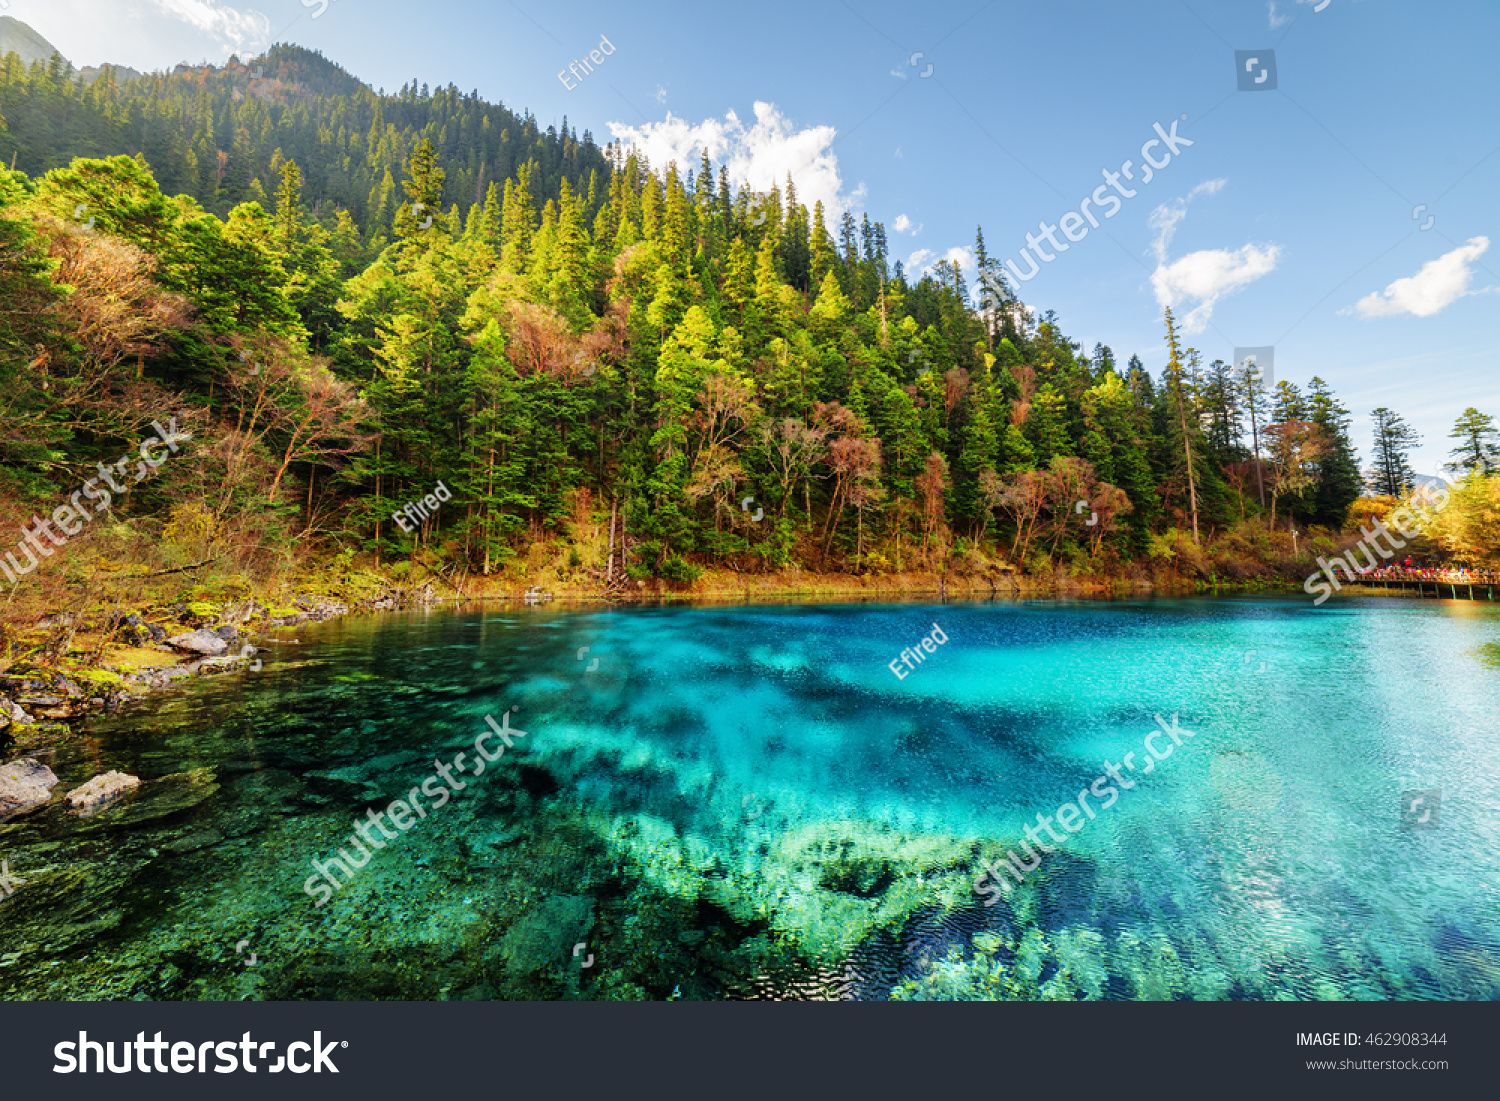 Amazing View Five Coloured Pool The Stock Photo 462908344 Shutterstock